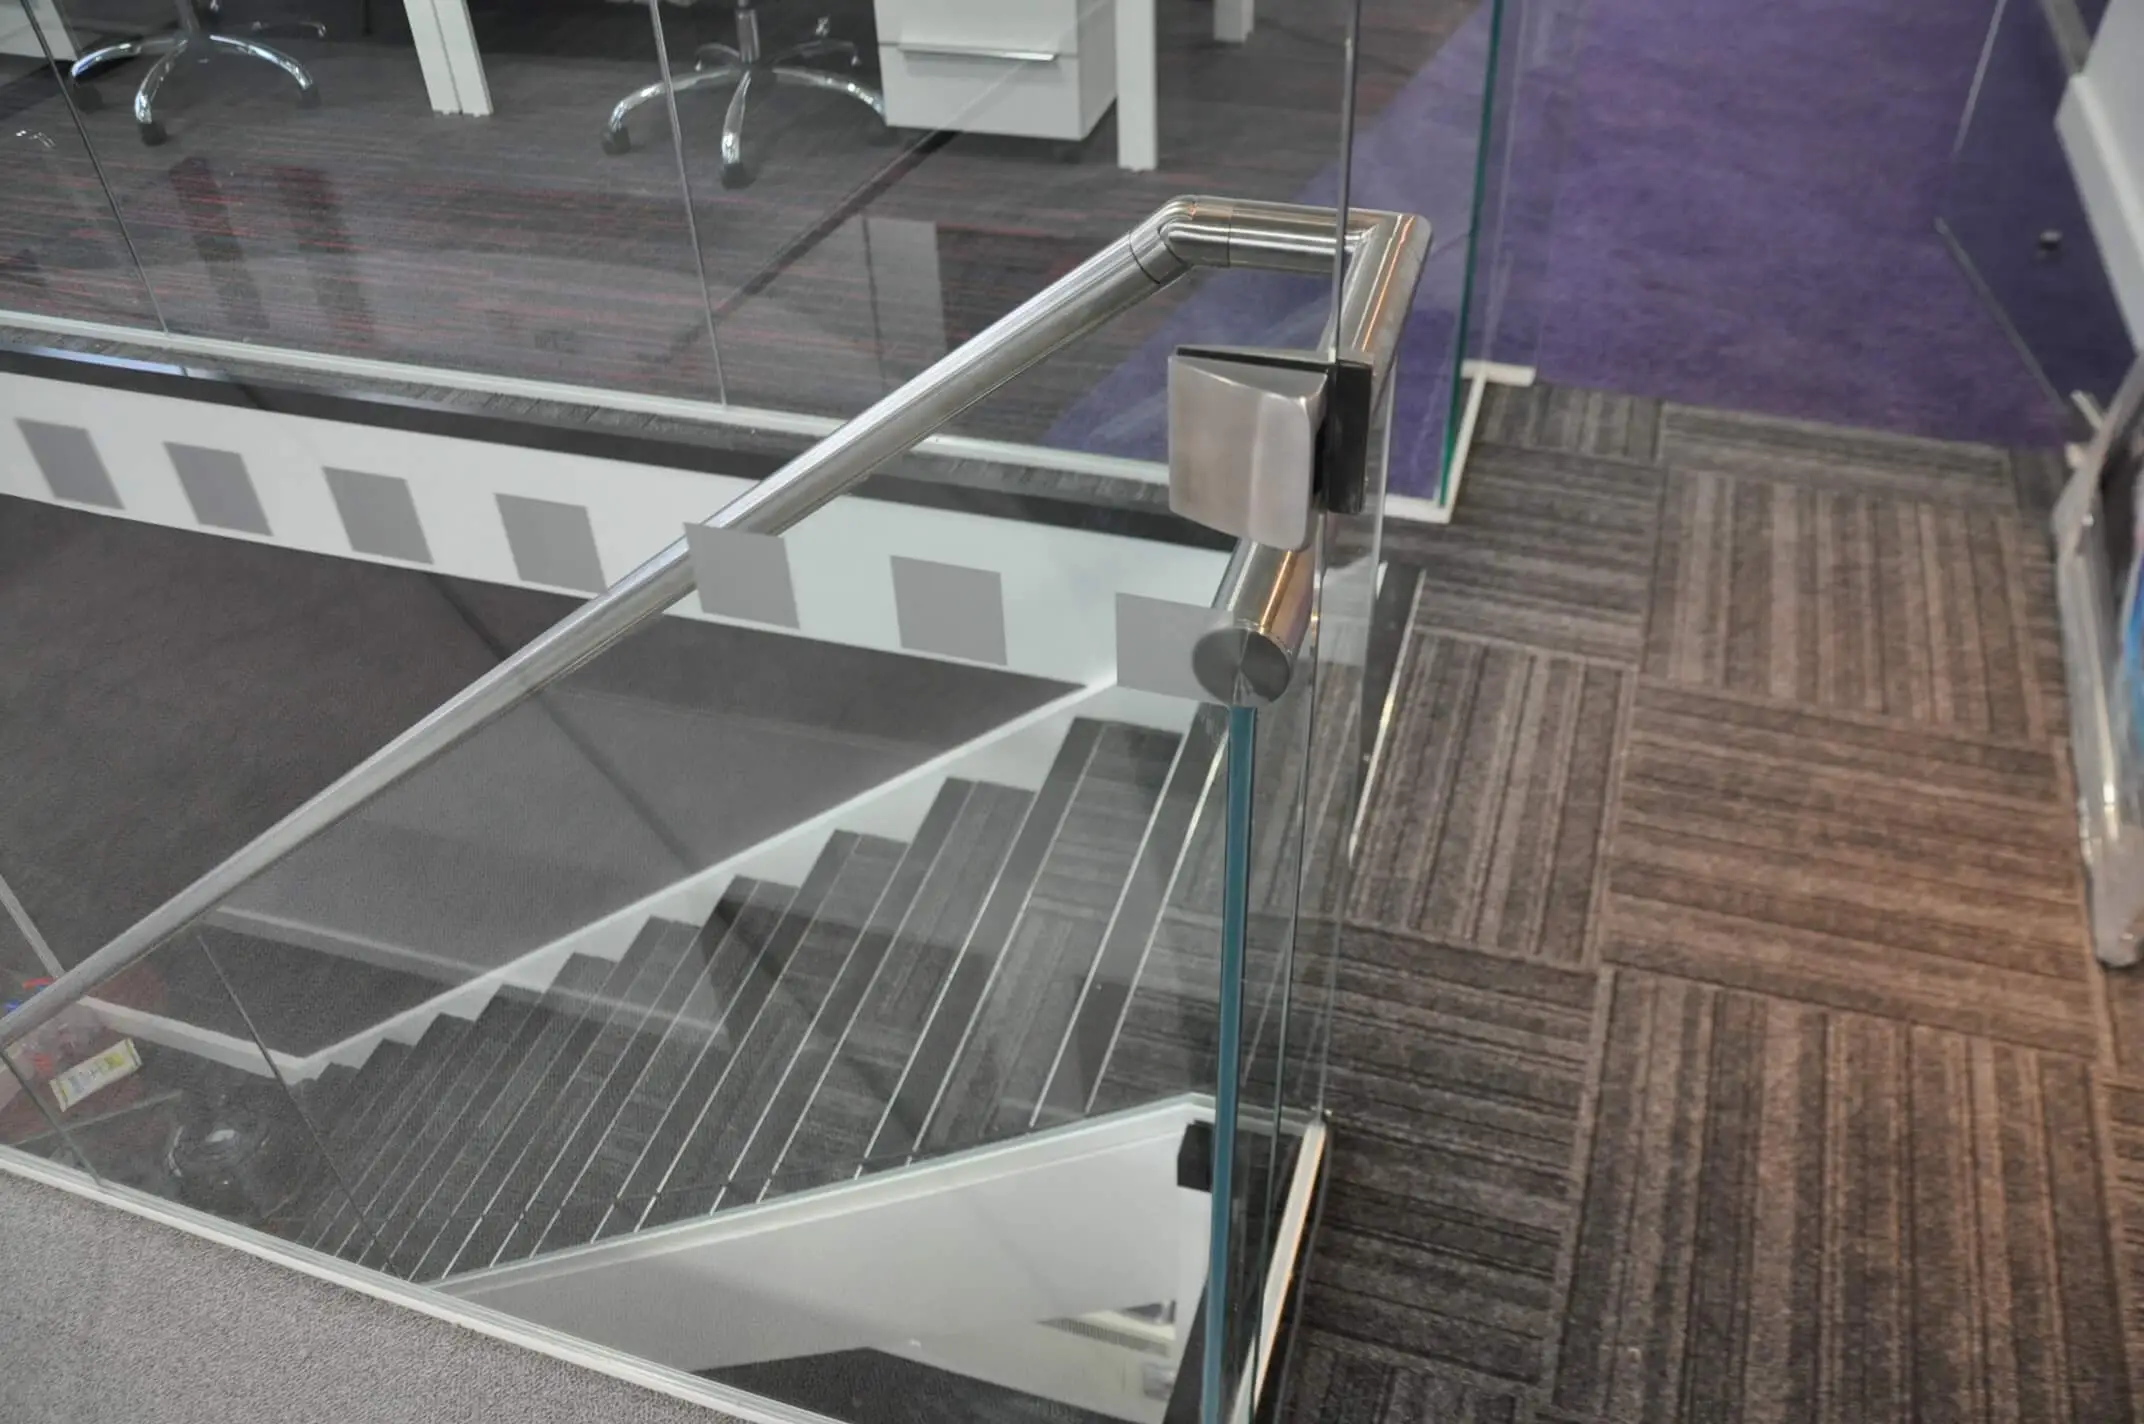 Designer flooring and glass stairs in office space